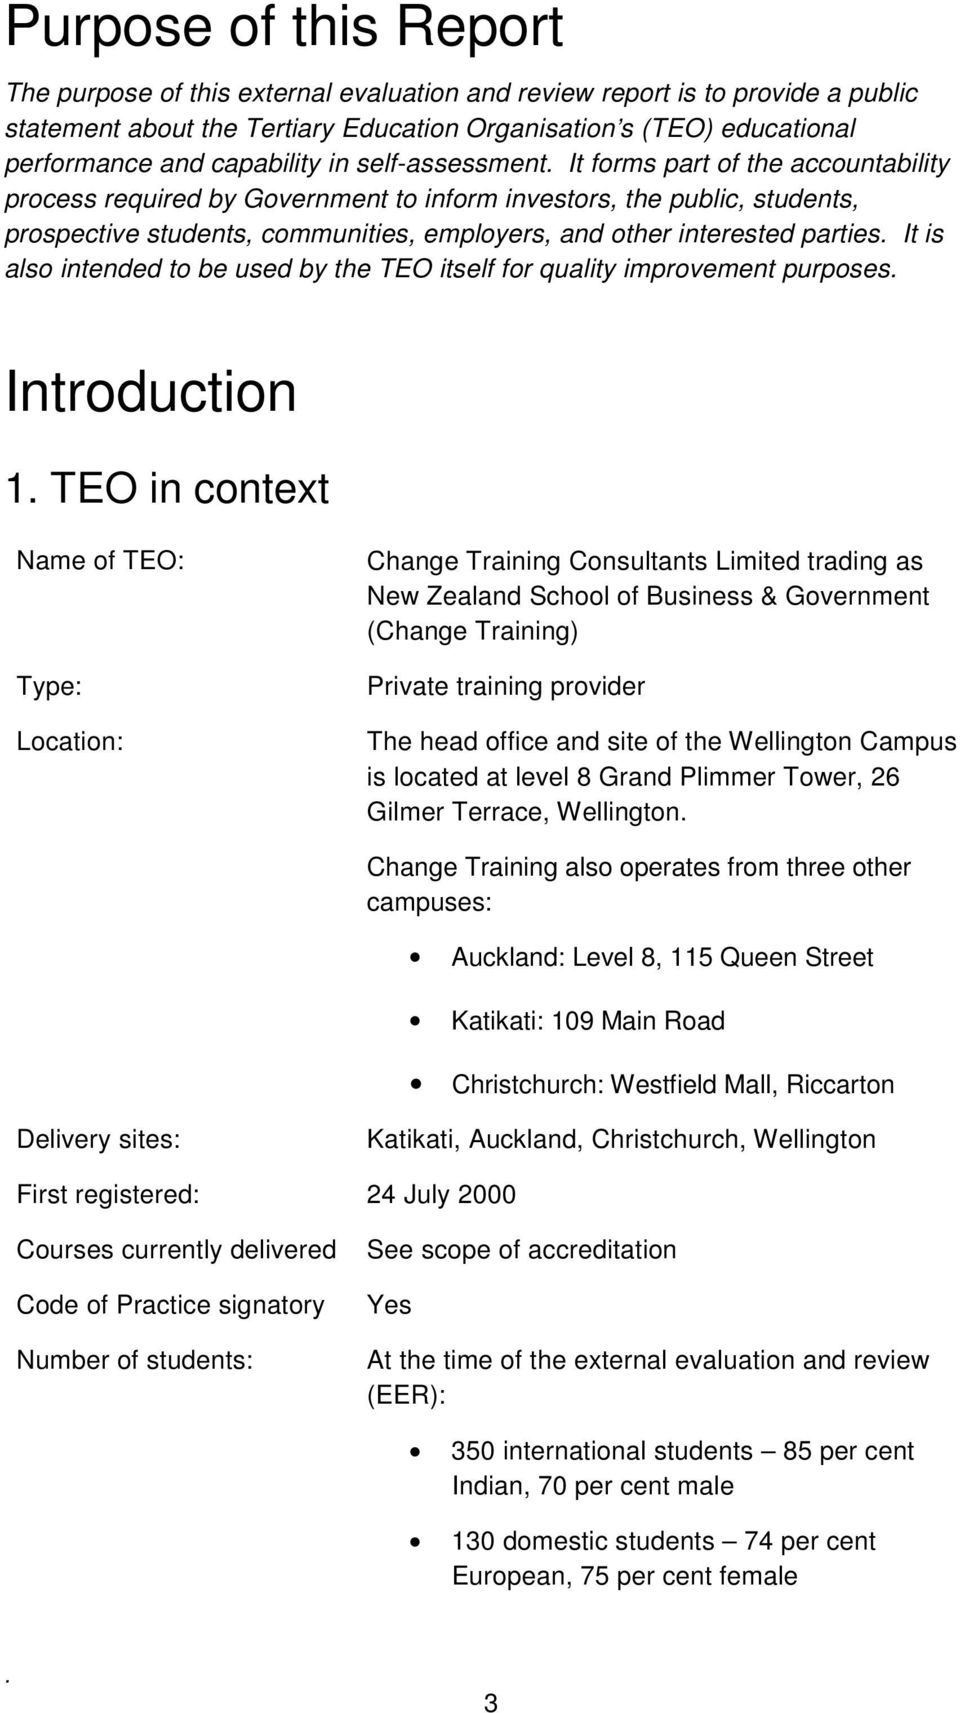 interested parties It is also intended to be used by the TEO itself for quality improvement purposes Introduction 1 TEO in context Name of TEO: Type: Location: Change Training Consultants Limited